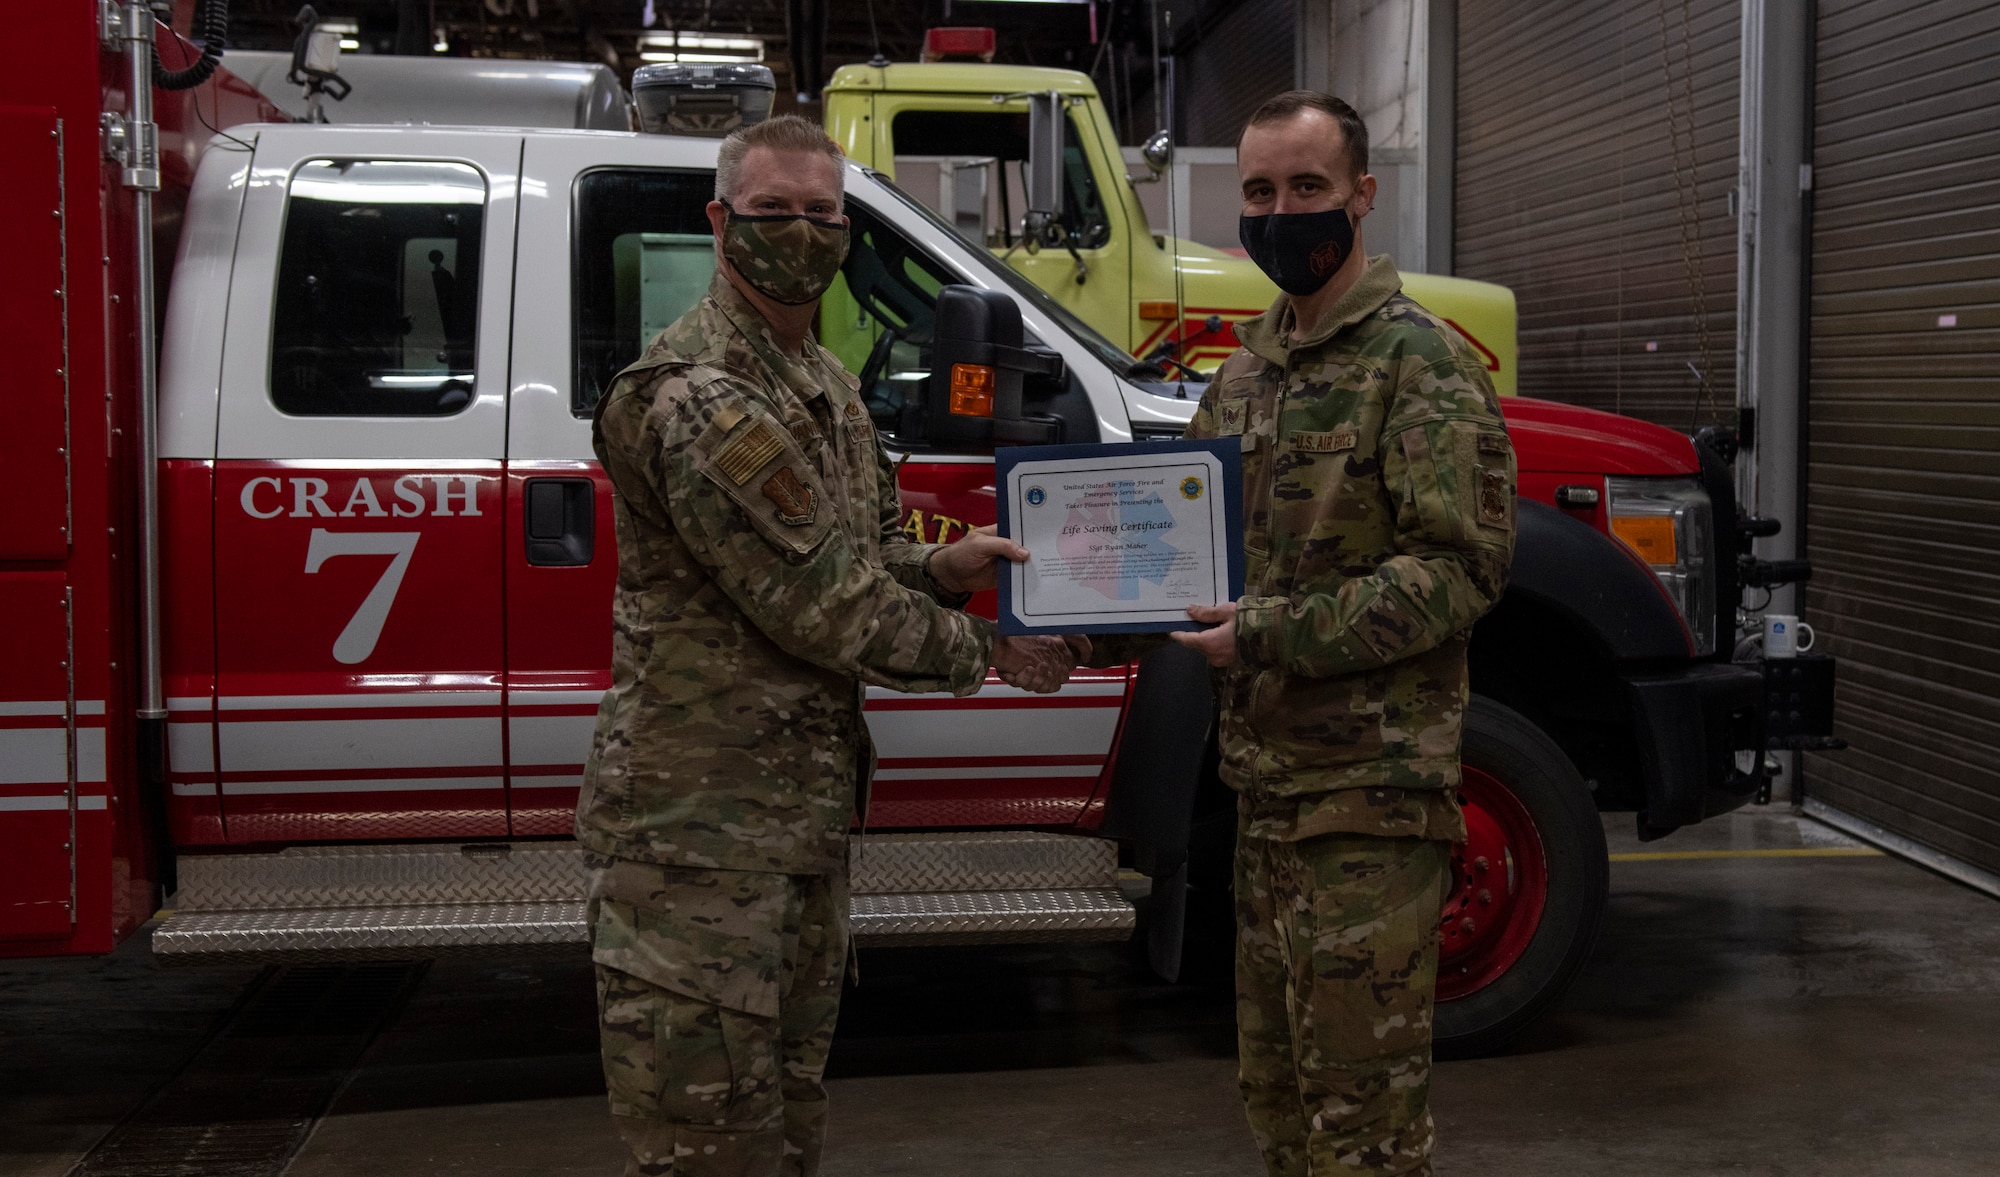 U.S. Air Force Col. David Vanderburg, 97th Mission Support Group commander, poses with Staff Sgt. Ryan Mayher, 97th Civil Engineer Squadron Fire and Emergency Services firefighter, at Altus Air Force Base, Jan. 13, 2022. Mayher was honored for his efforts in saving the life of a 78-year-old individual. (U.S. Air Force photo by Airman 1st Class Miyah Gray)